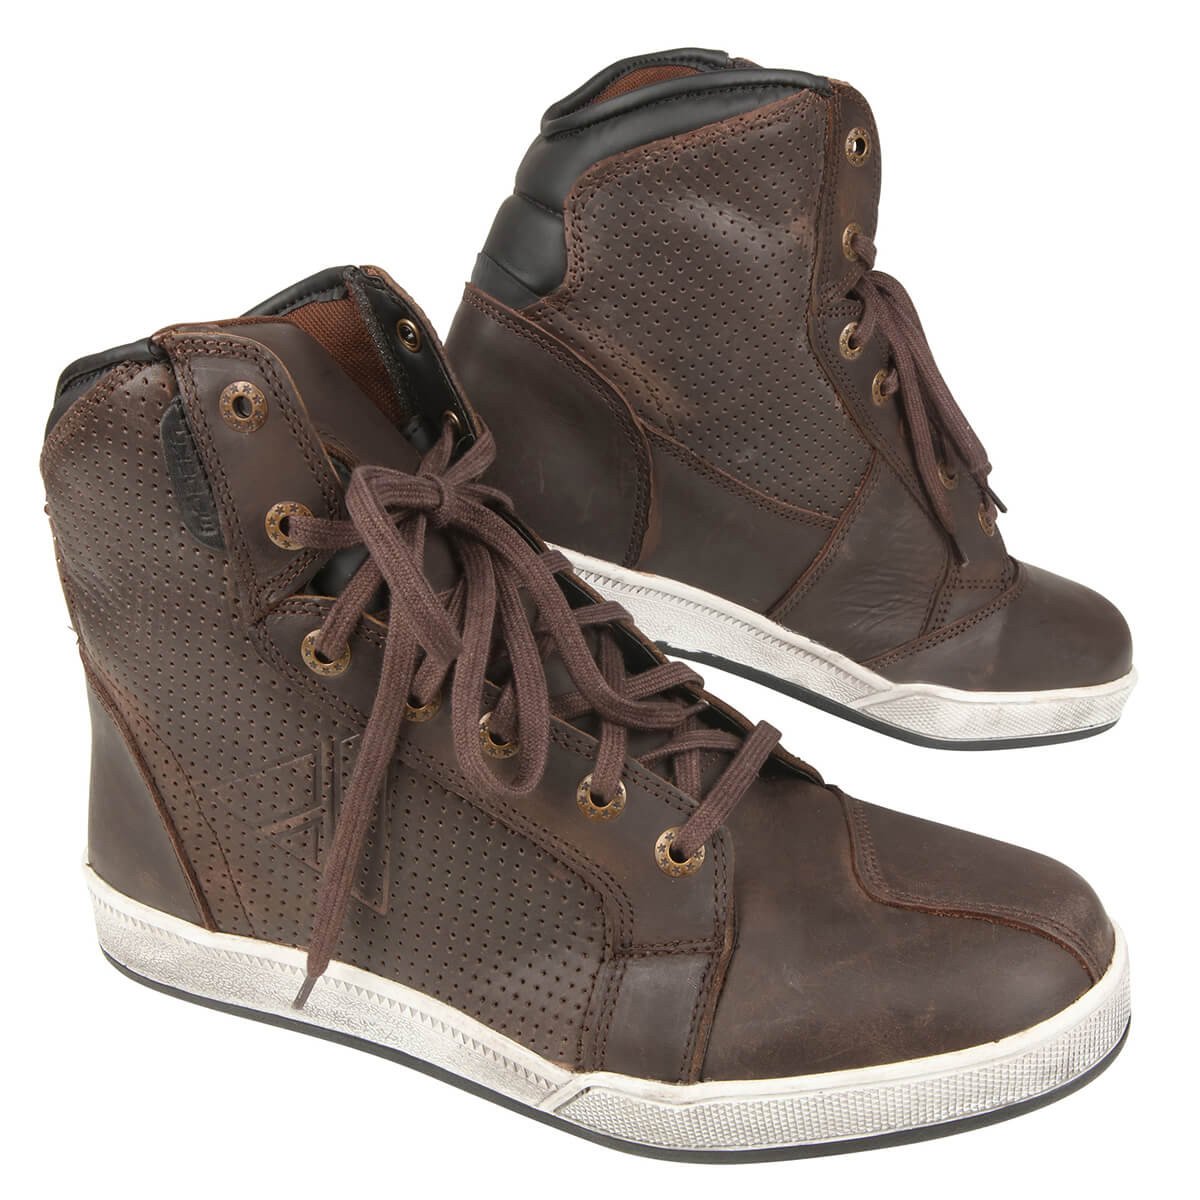 Image of Modeka Midtown Sneakers Brown Size 40 ID 4045765137932